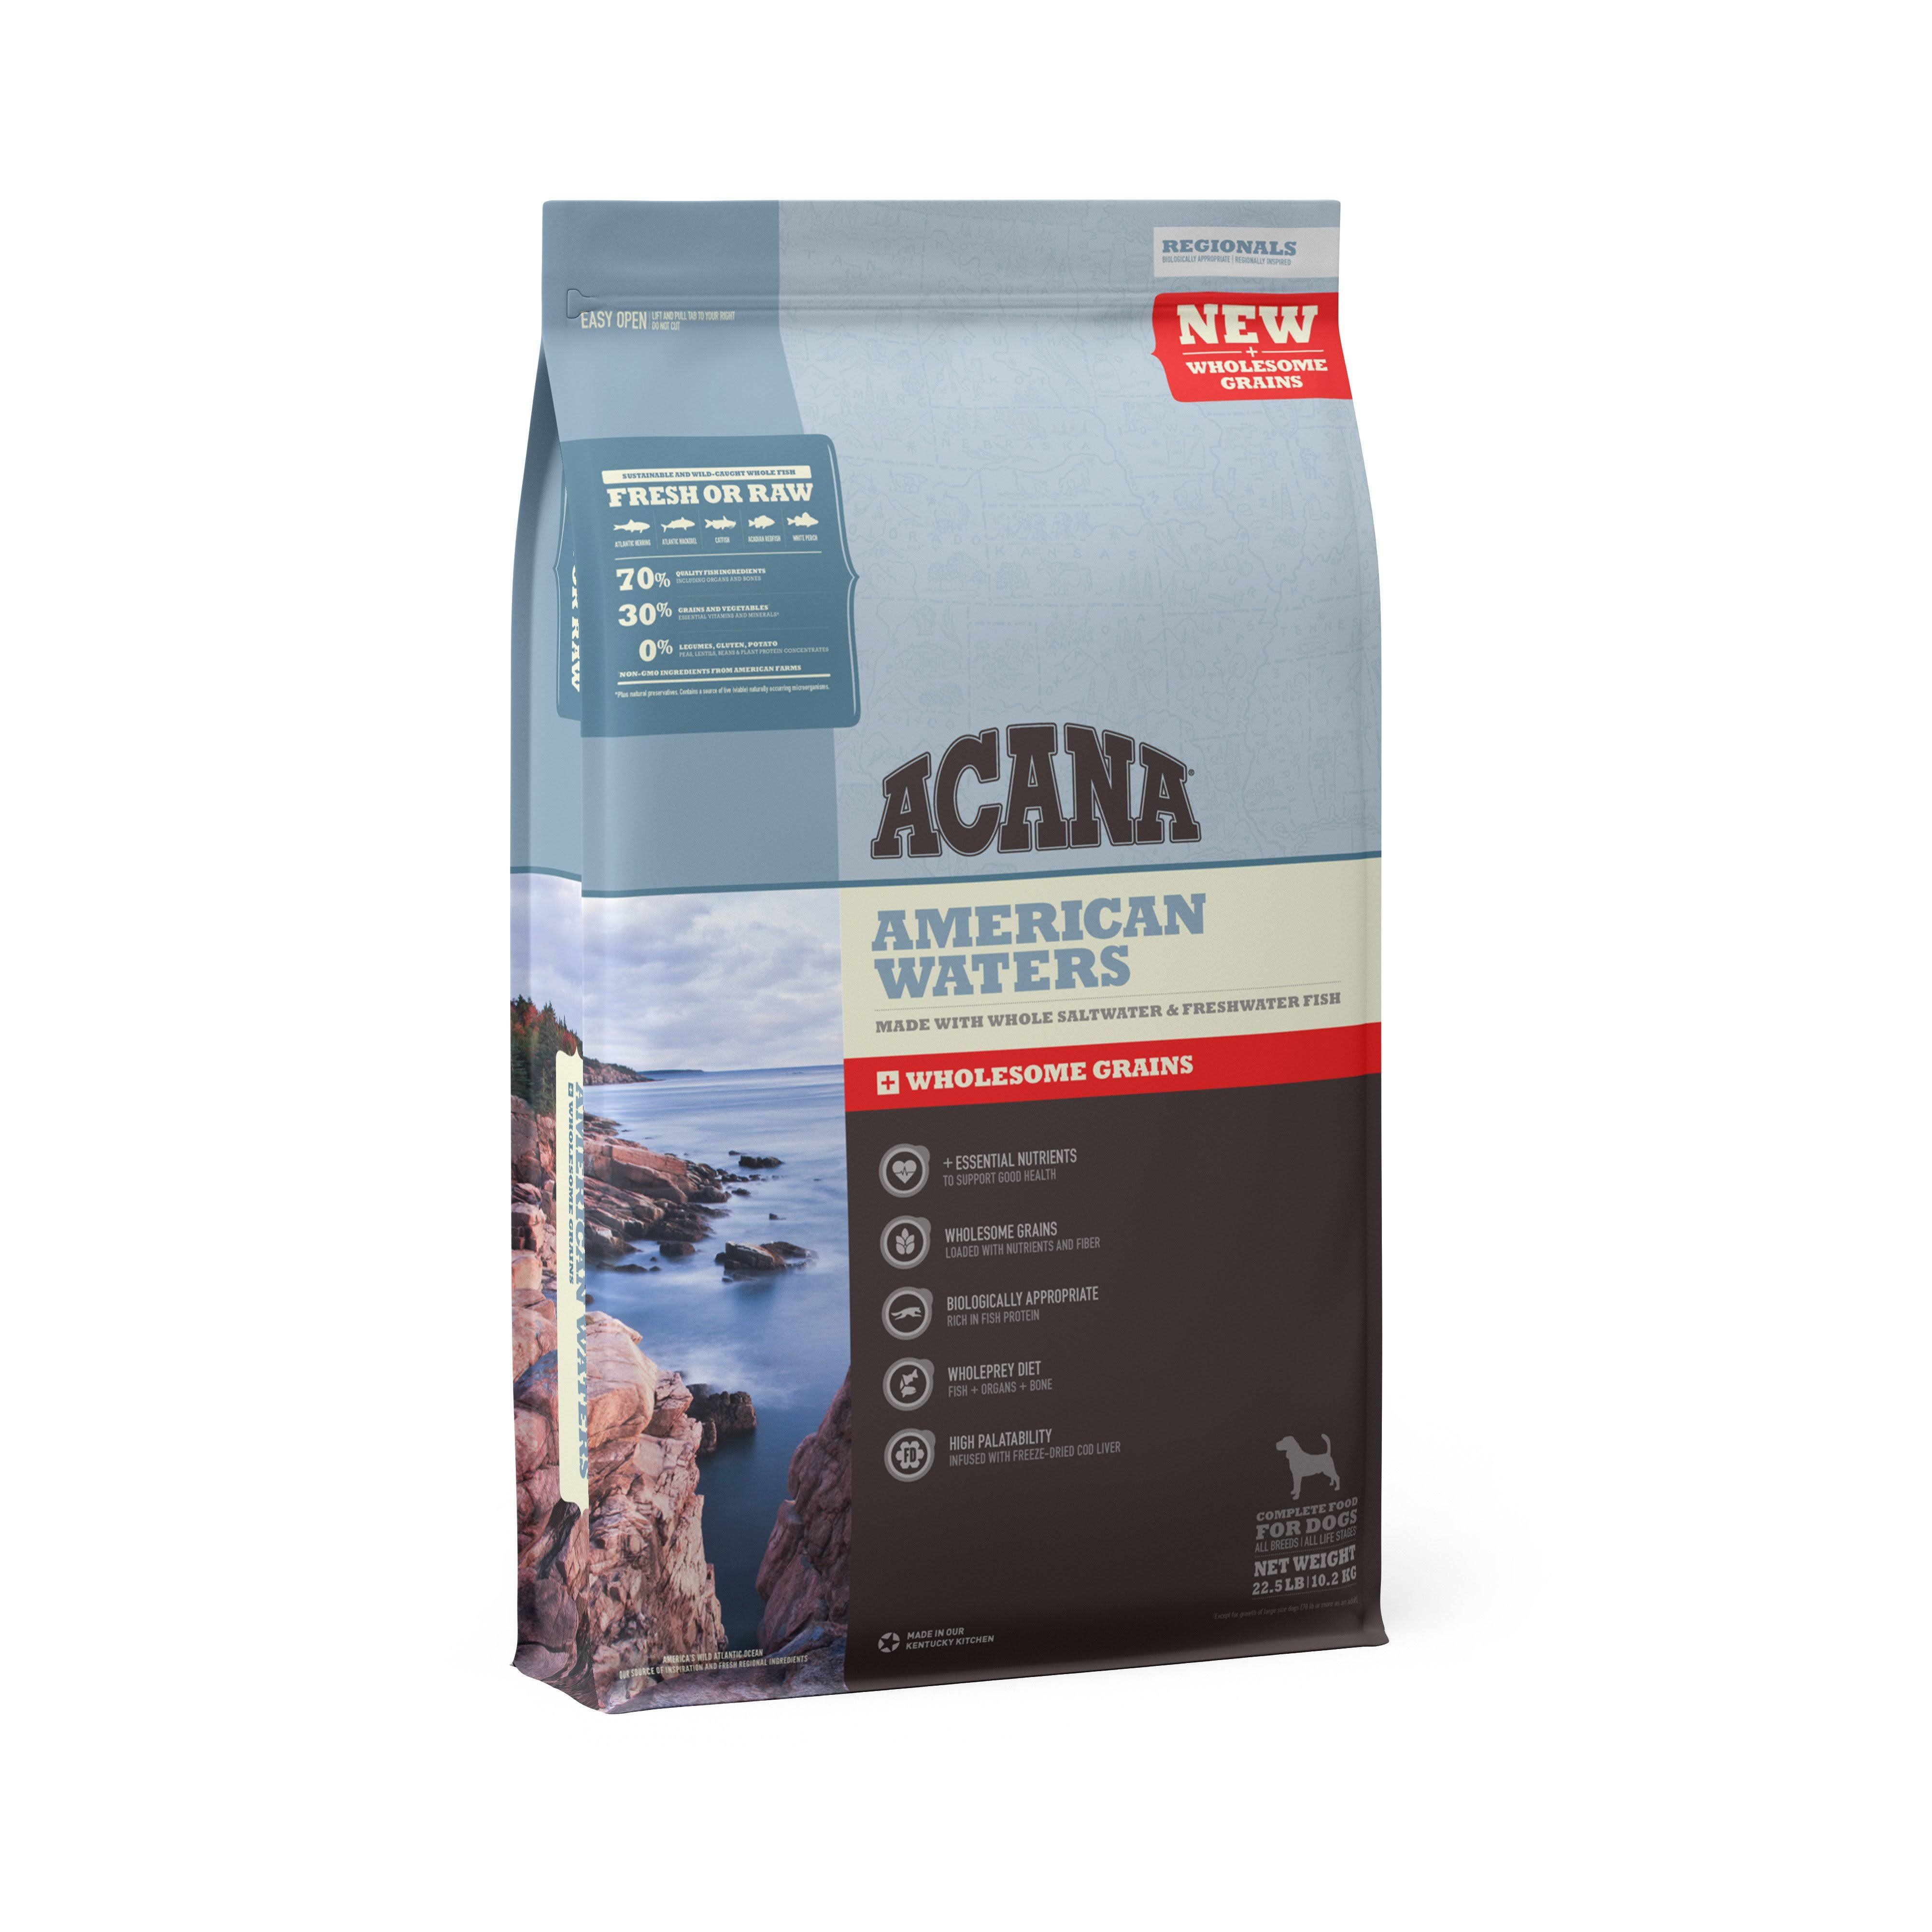 ACANA Wholesome Grains American Waters Dry Dog Food 22.5 lbs